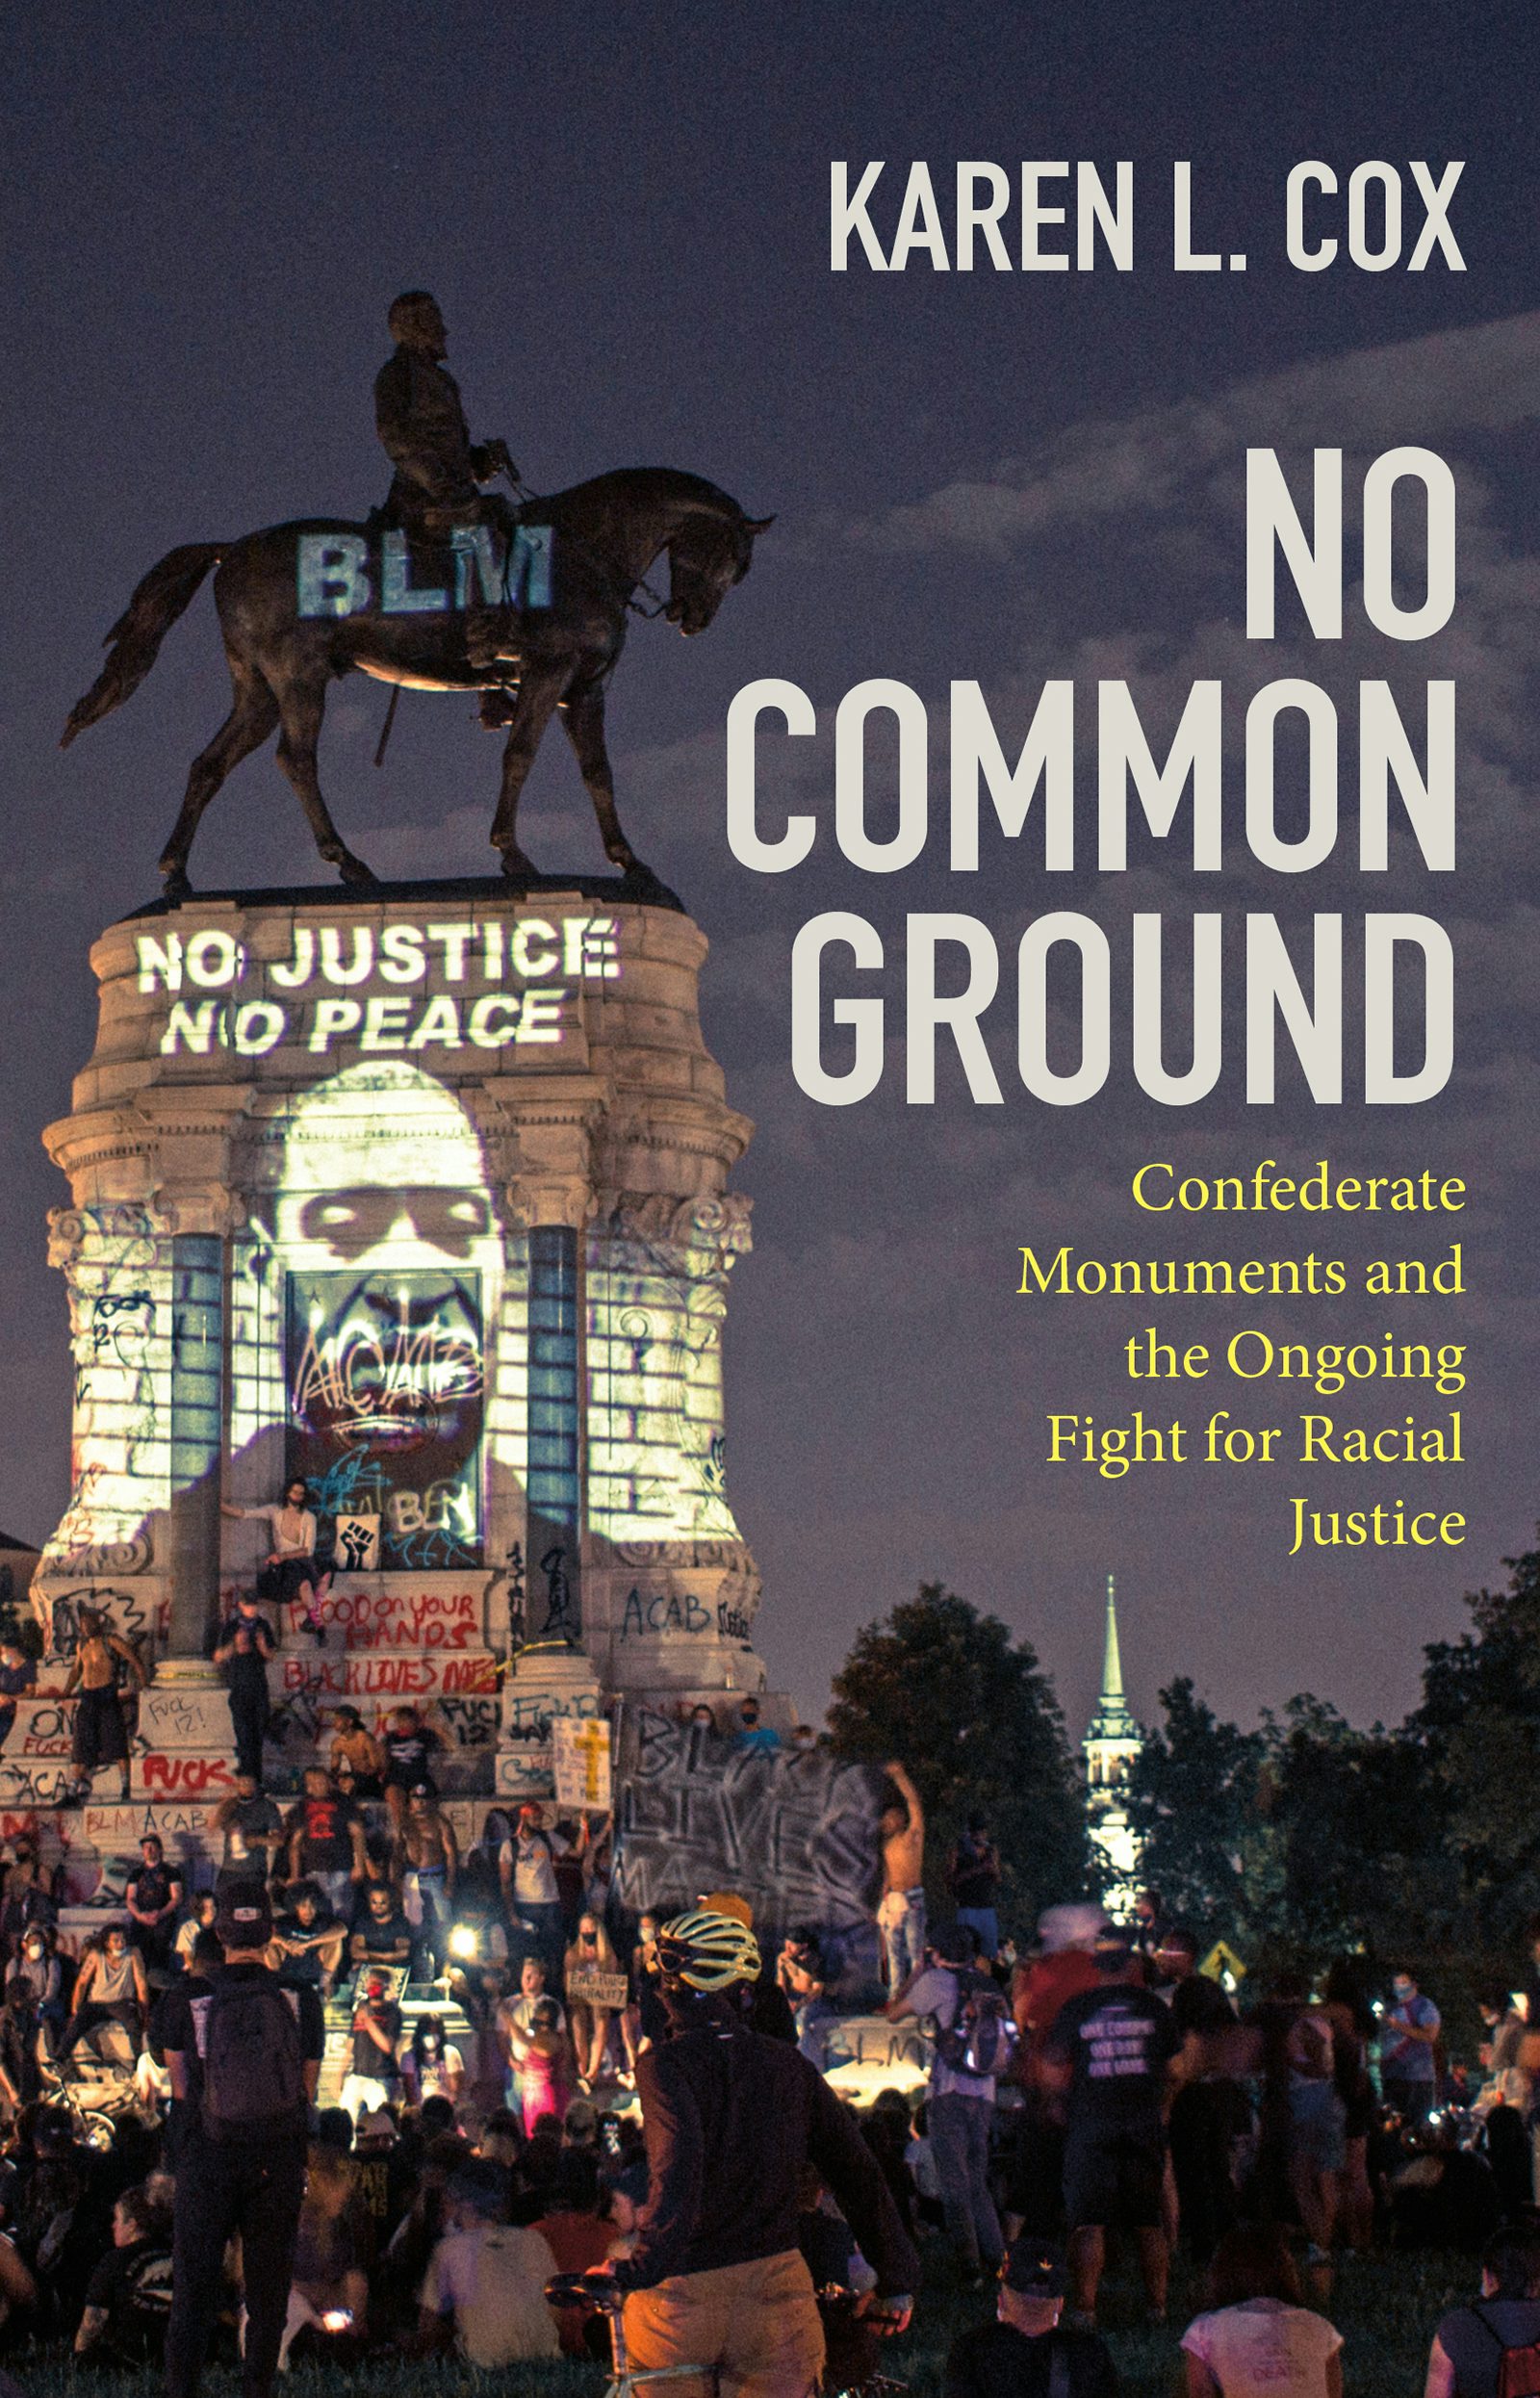  Confederate Monuments and the Ongoing Fight for Racial Justice